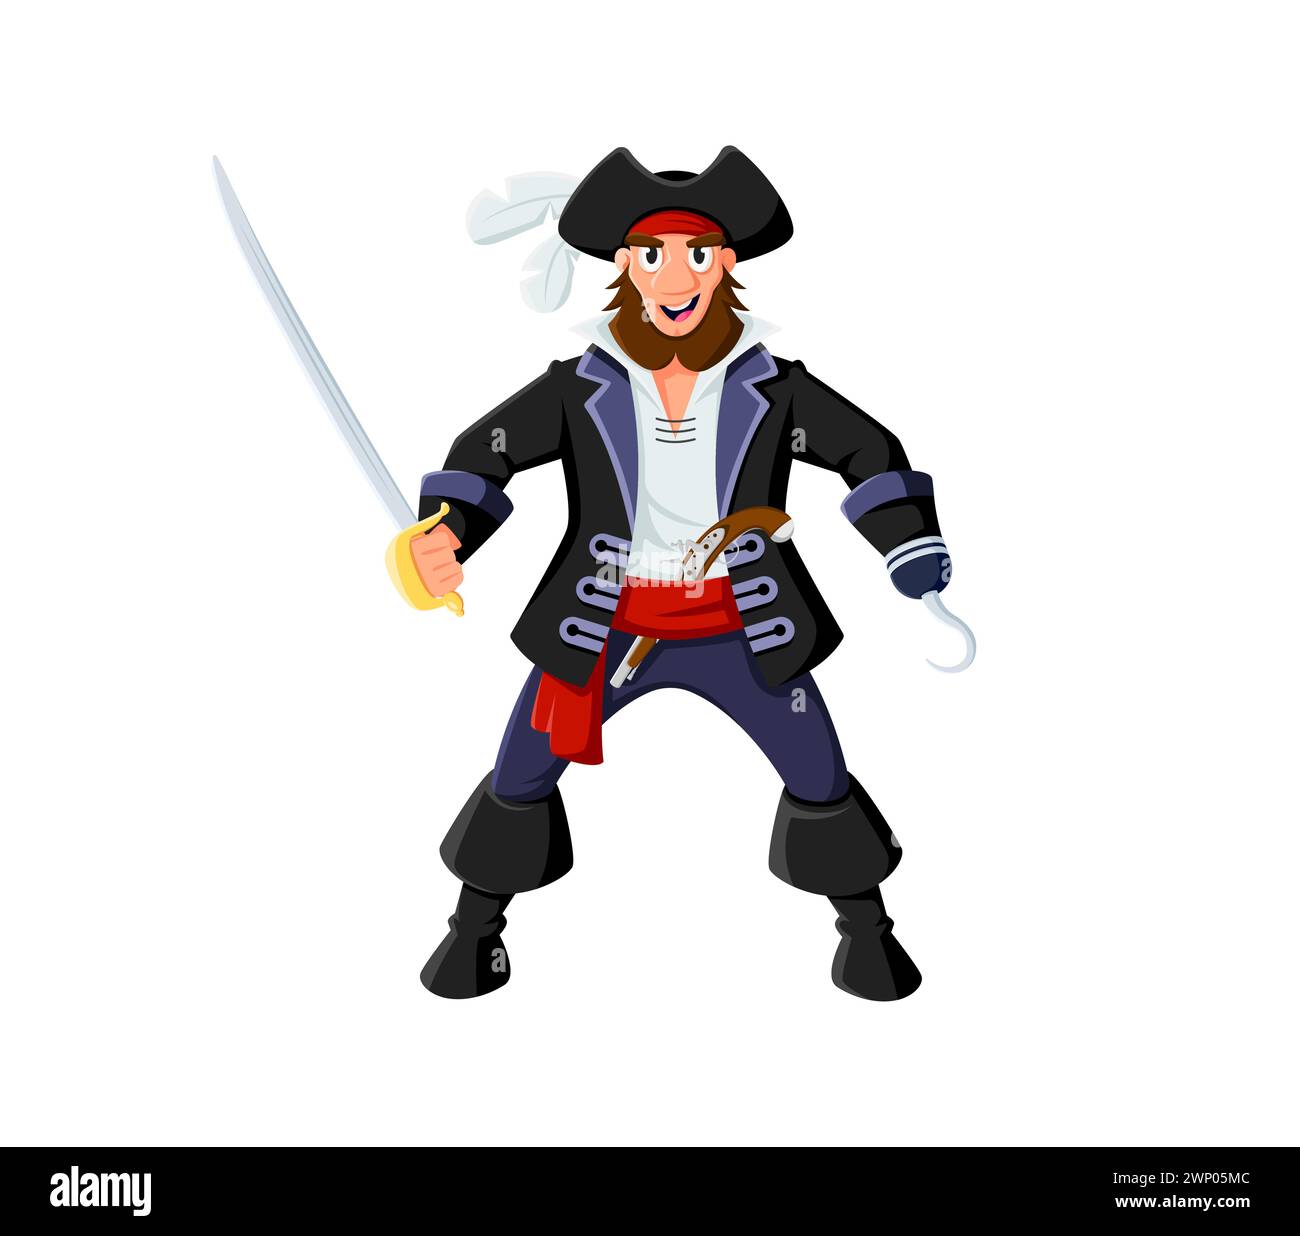 Captain, fantasy, hand, hook, metal, pirate, weapon icon - Free